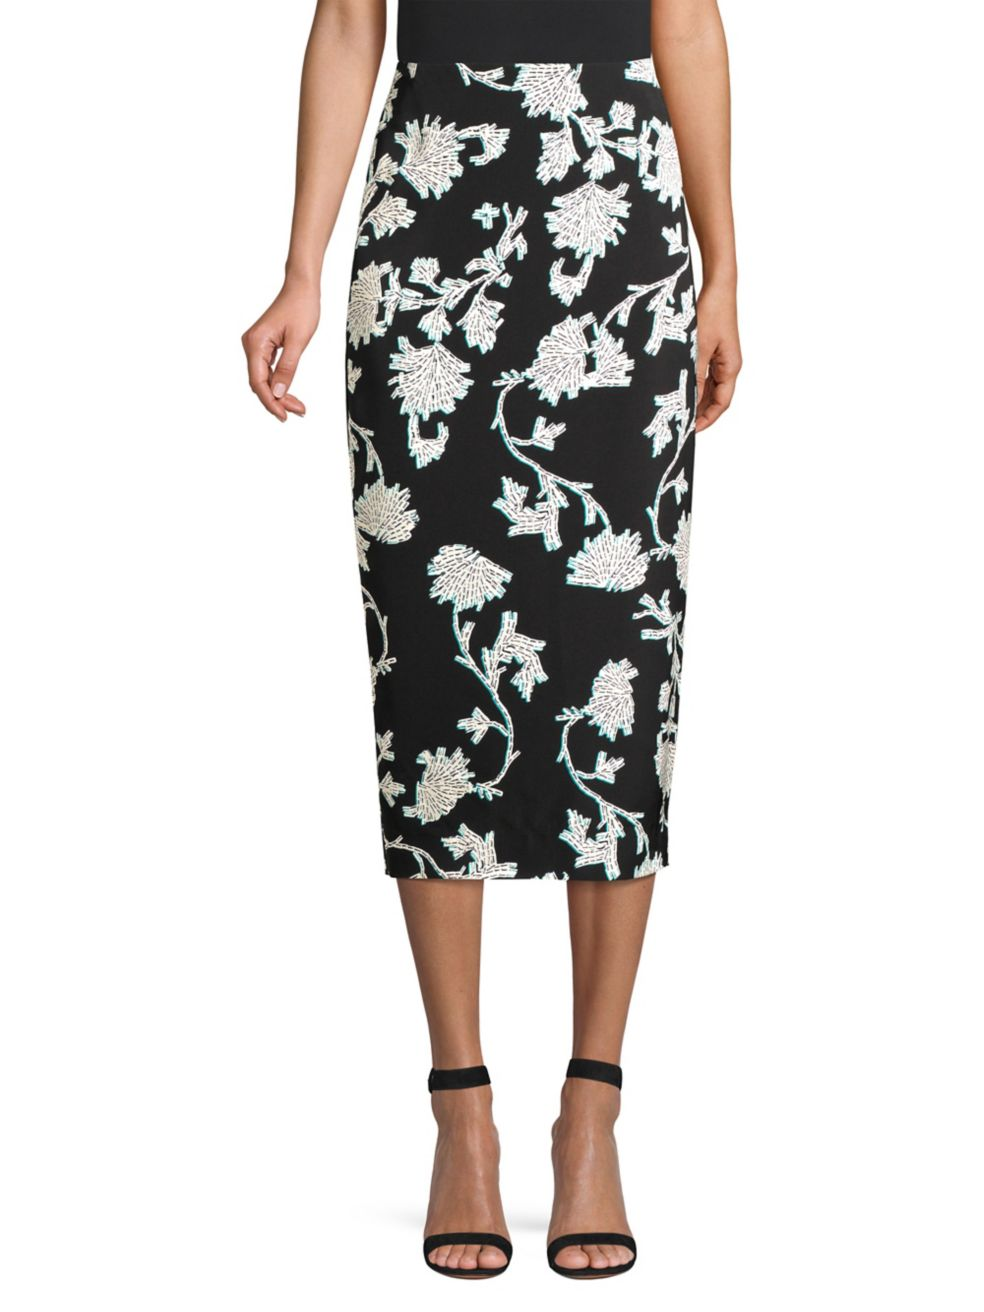 Fashion Finds: Top 10 Pencil Skirts - Prime Women | An Online Magazine